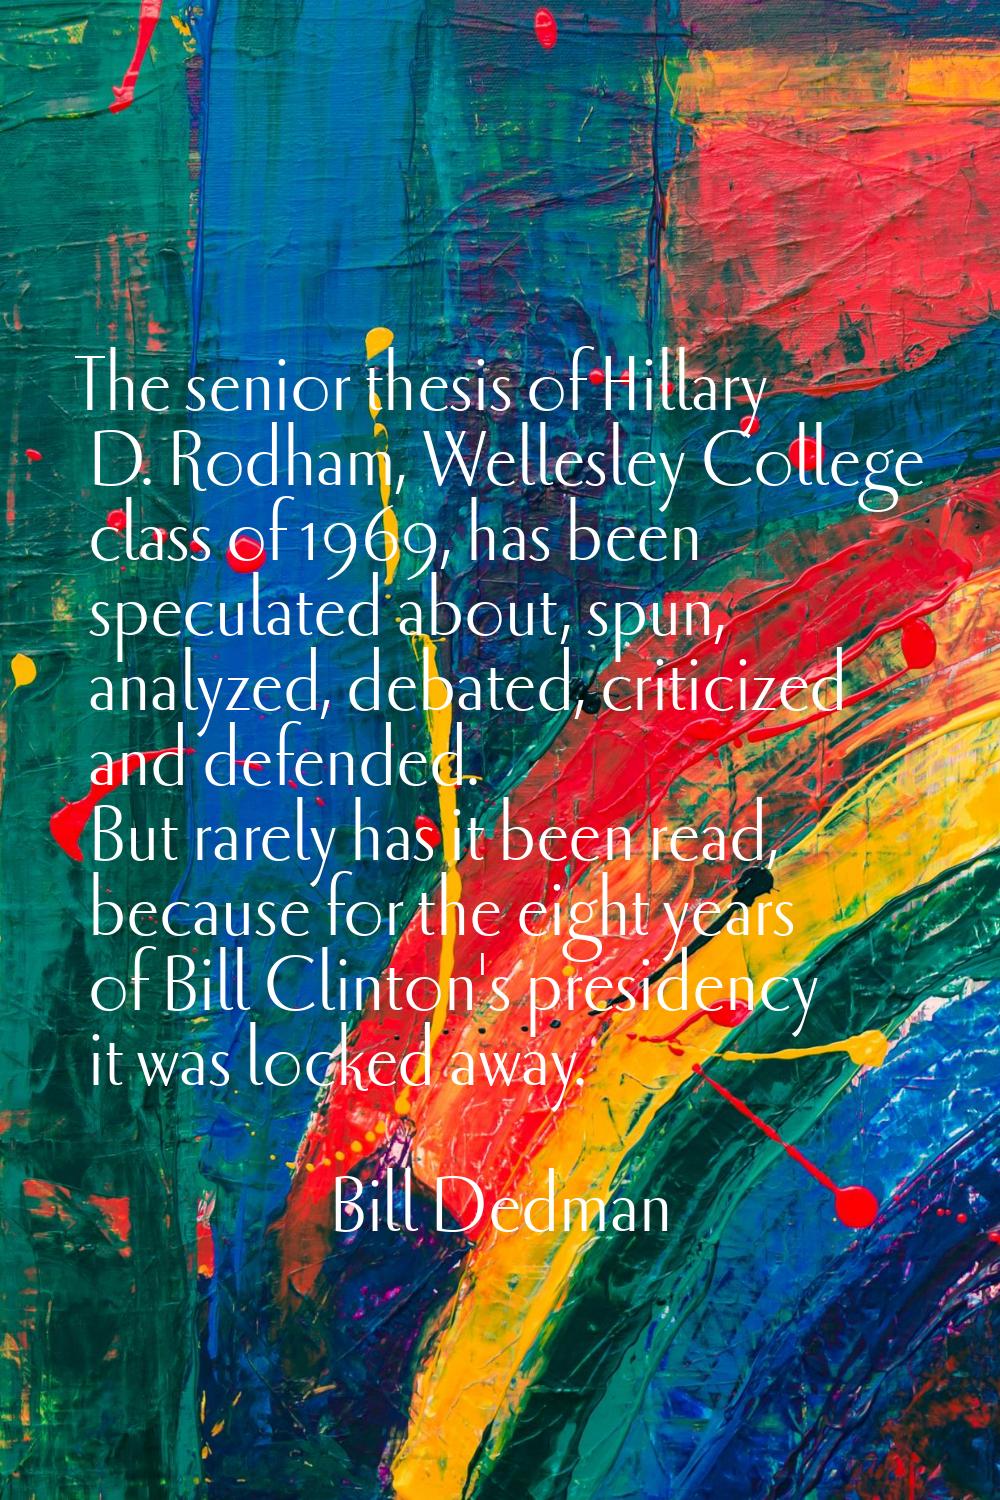 The senior thesis of Hillary D. Rodham, Wellesley College class of 1969, has been speculated about,